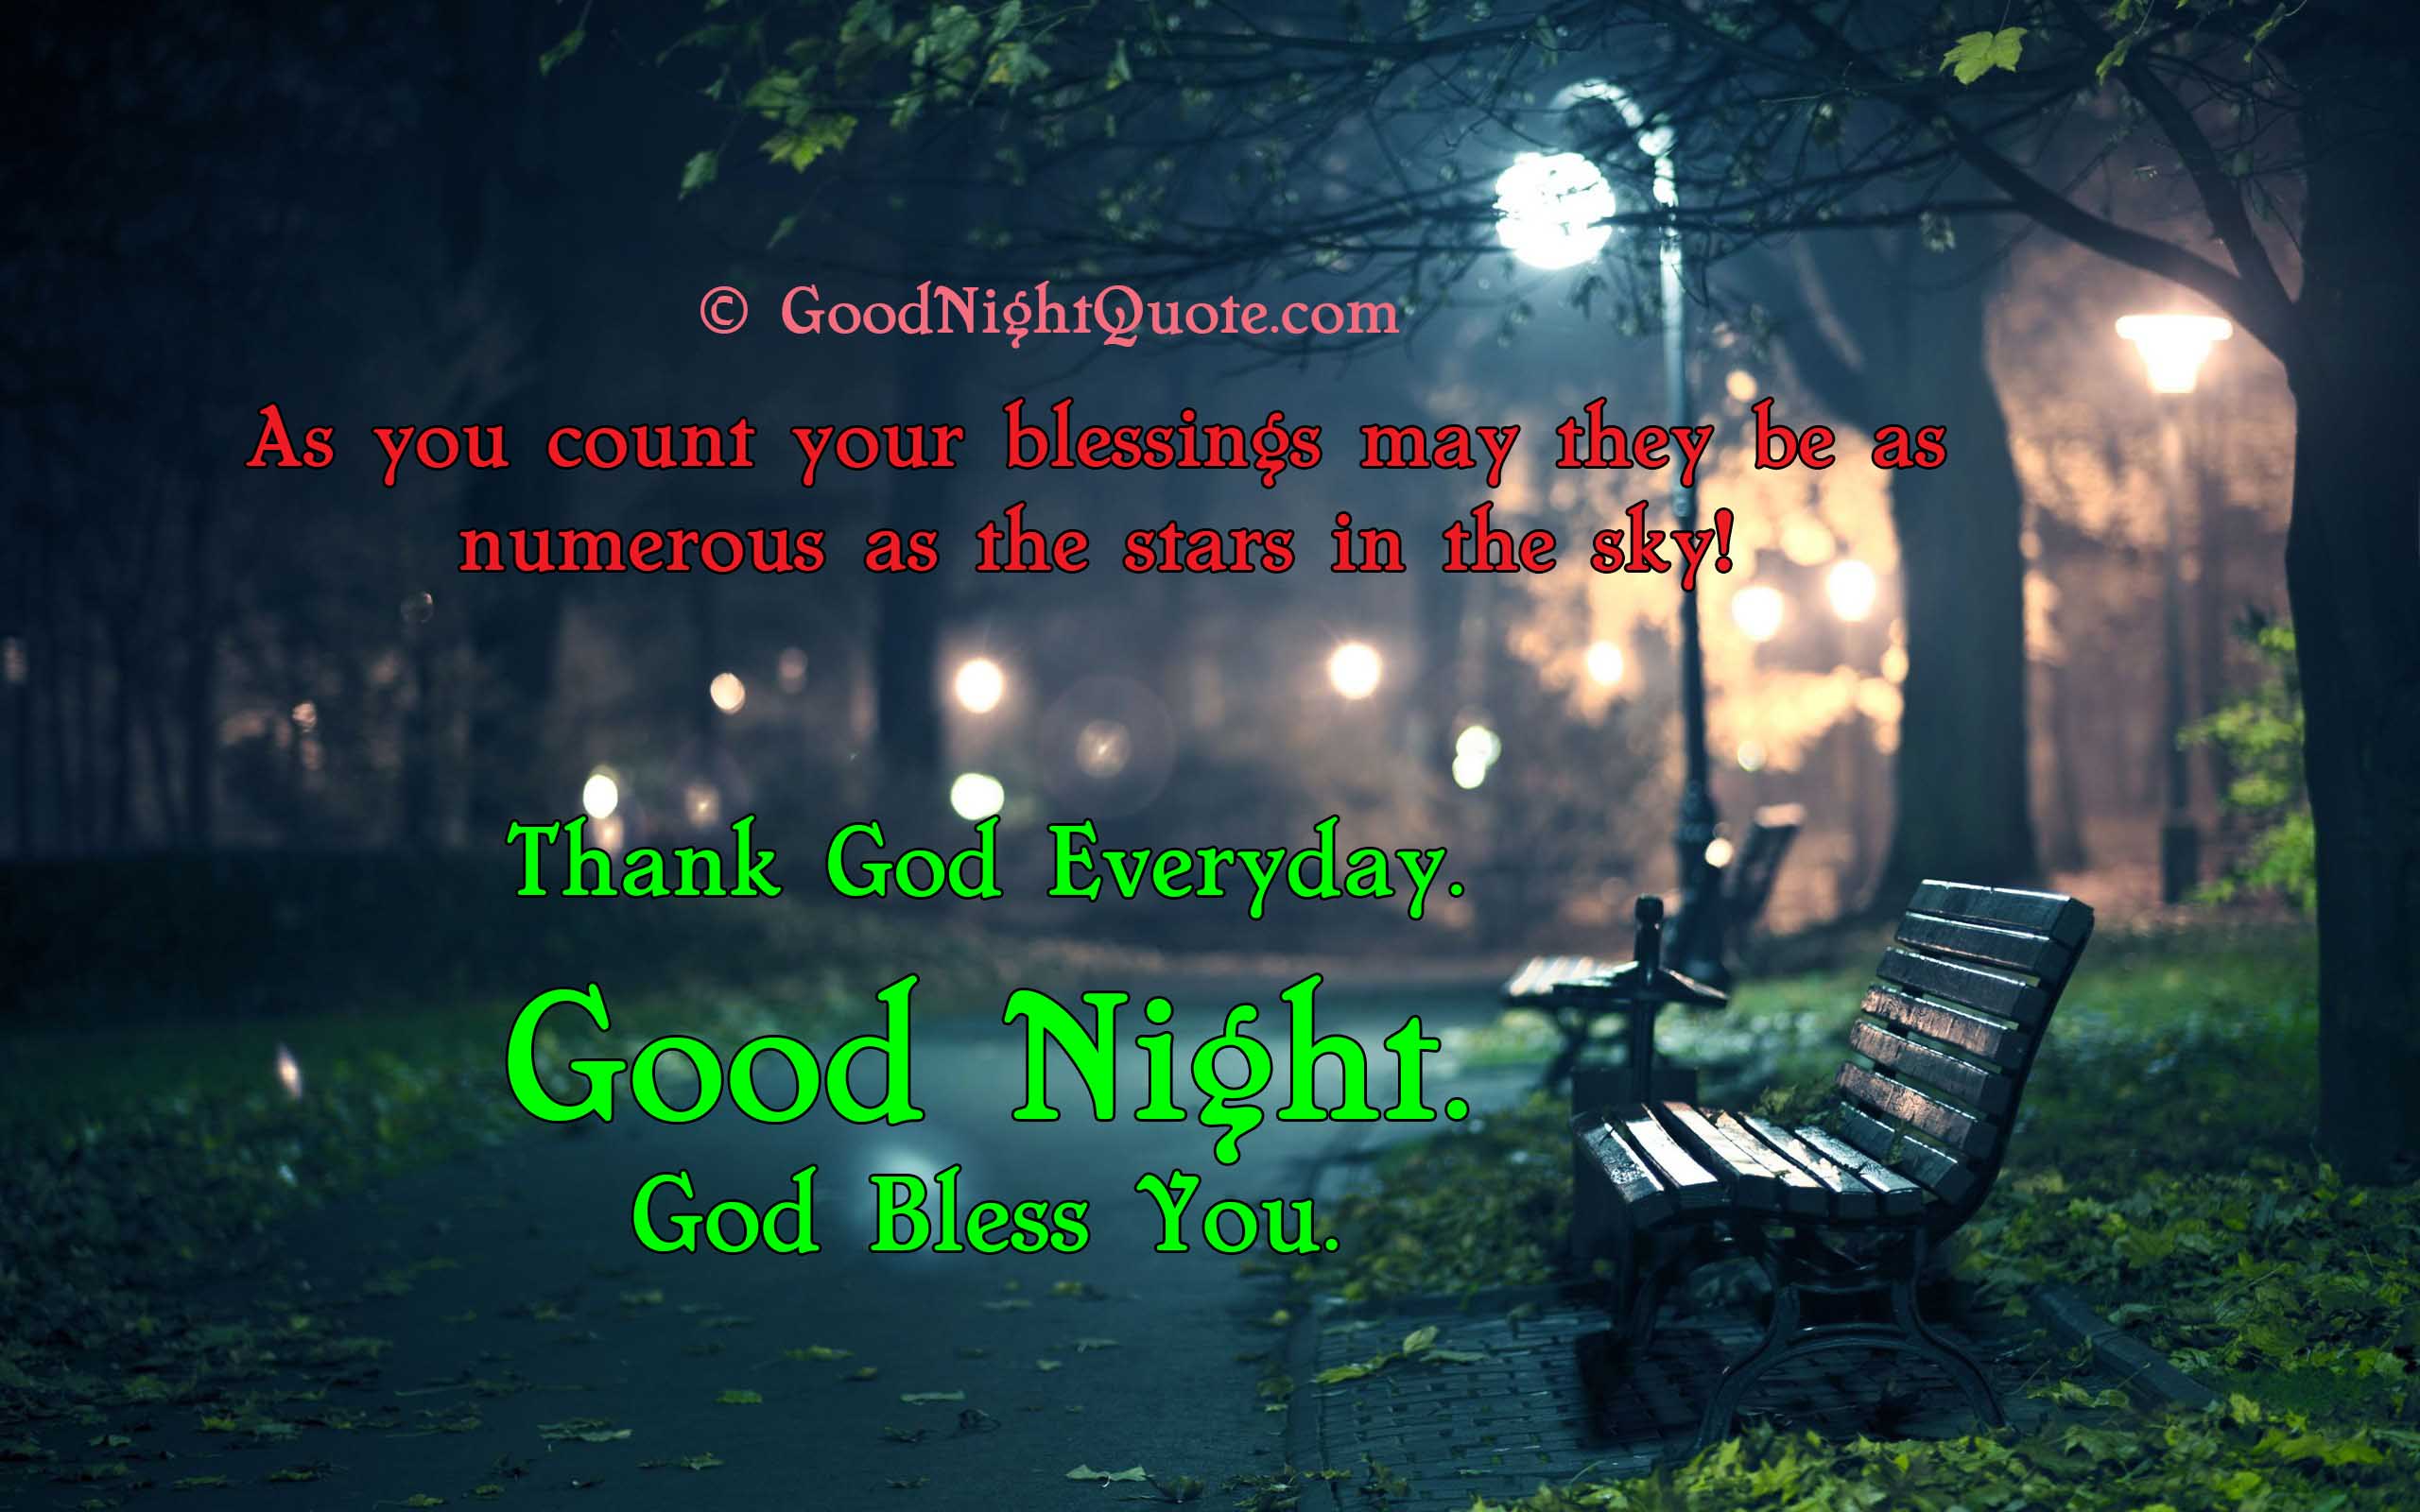 Good Night God Bless You Image & Prayer Quotes Night Quotes